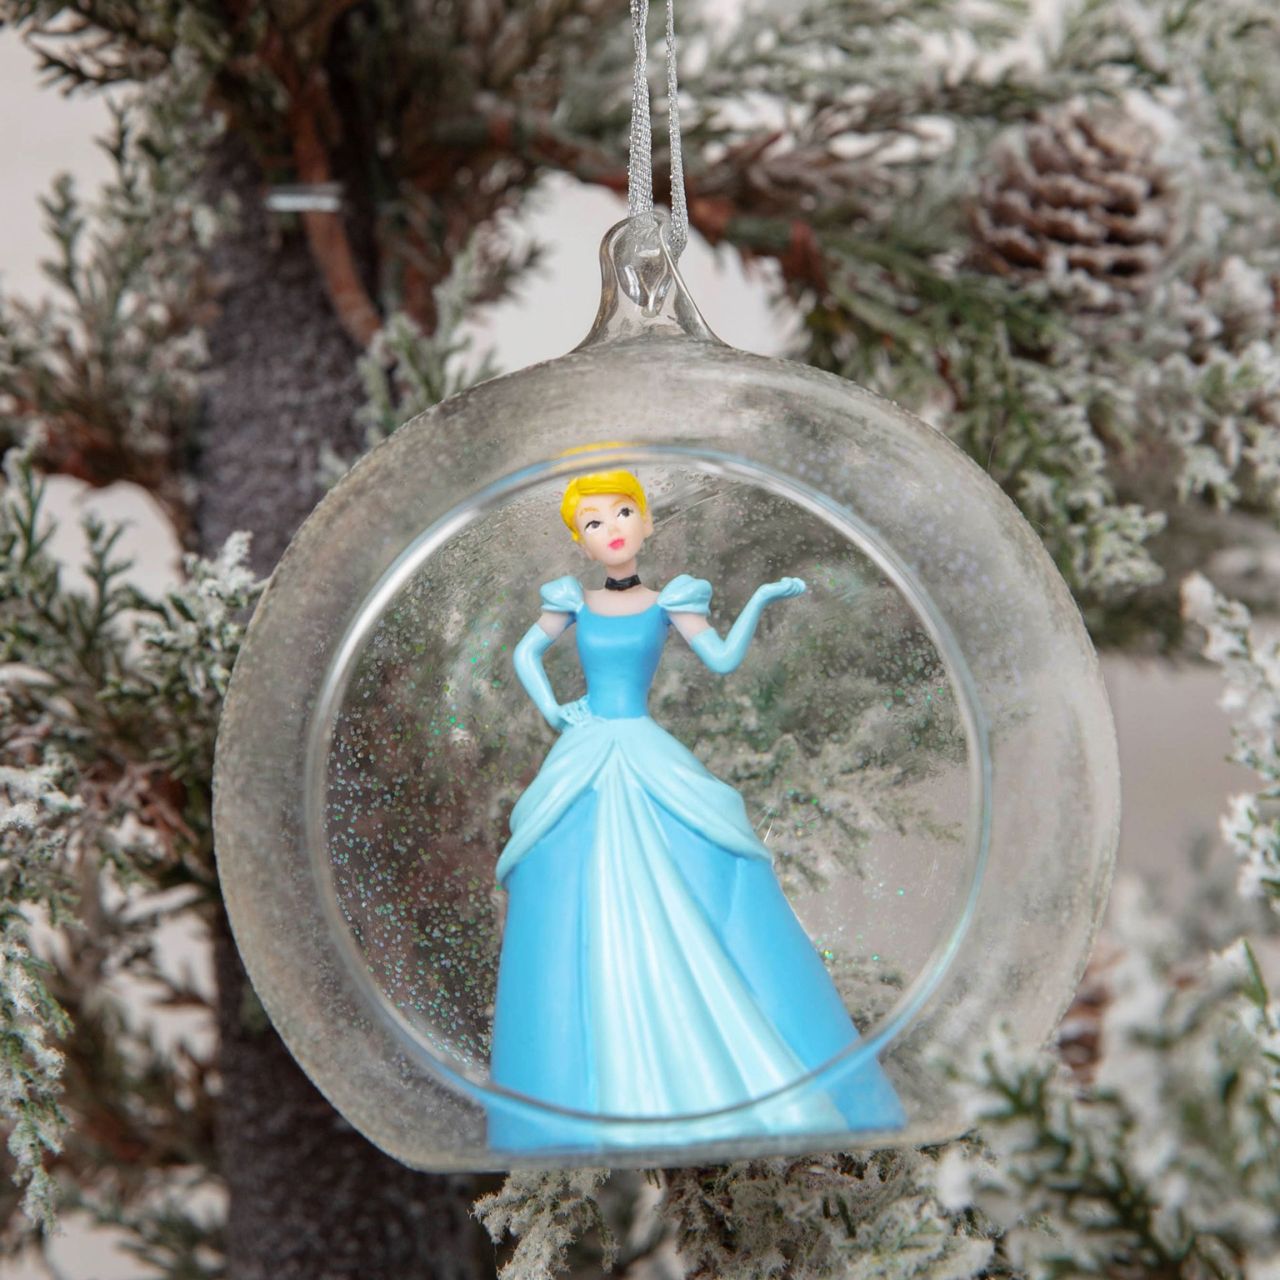 Disney Princess Cinderella 3D Bauble  Bring some Disney magic to your Christmas tree with this collectable Cinderella hanging decoration. From the Disney Princess Christmas Collection.